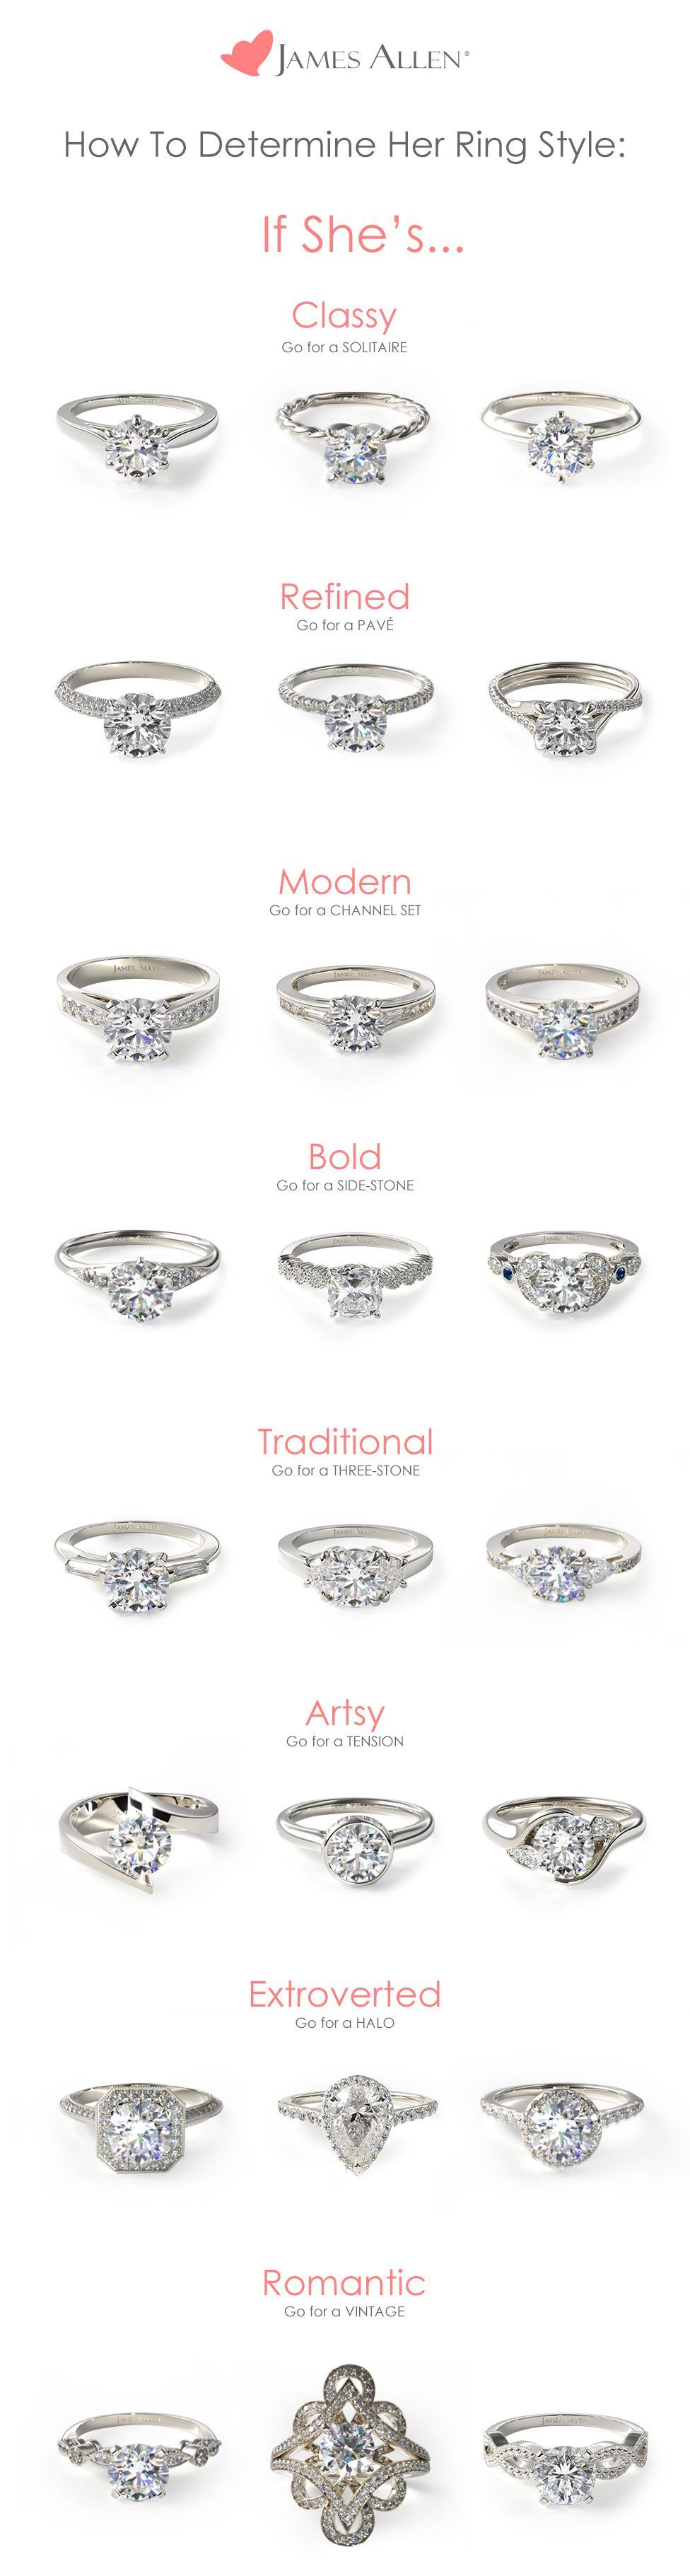 What type of engagement ring suits her best? This doesn’t need to be a guessing game :-) Browse 100,000+ certified diamonds and